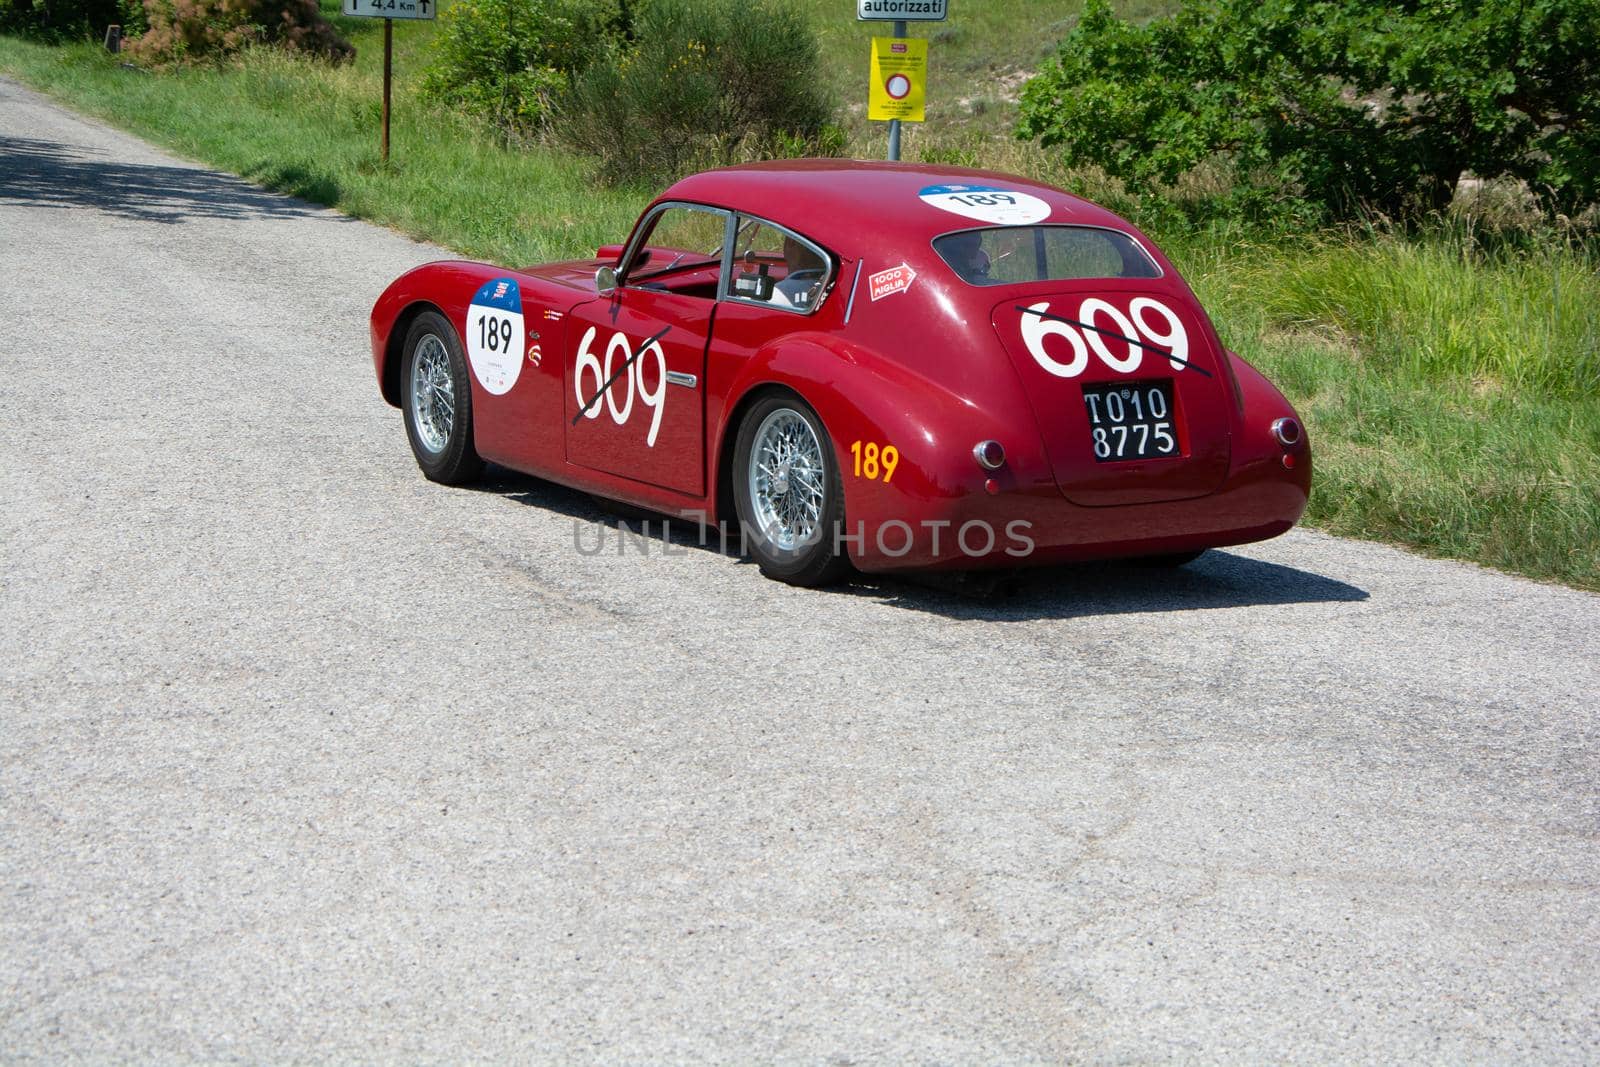 ERMINI 1100 BERLINETTA MOTTO 1950 on an old racing car in rally Mille Miglia 2022 the famous italian historical race (1927-1957 by massimocampanari